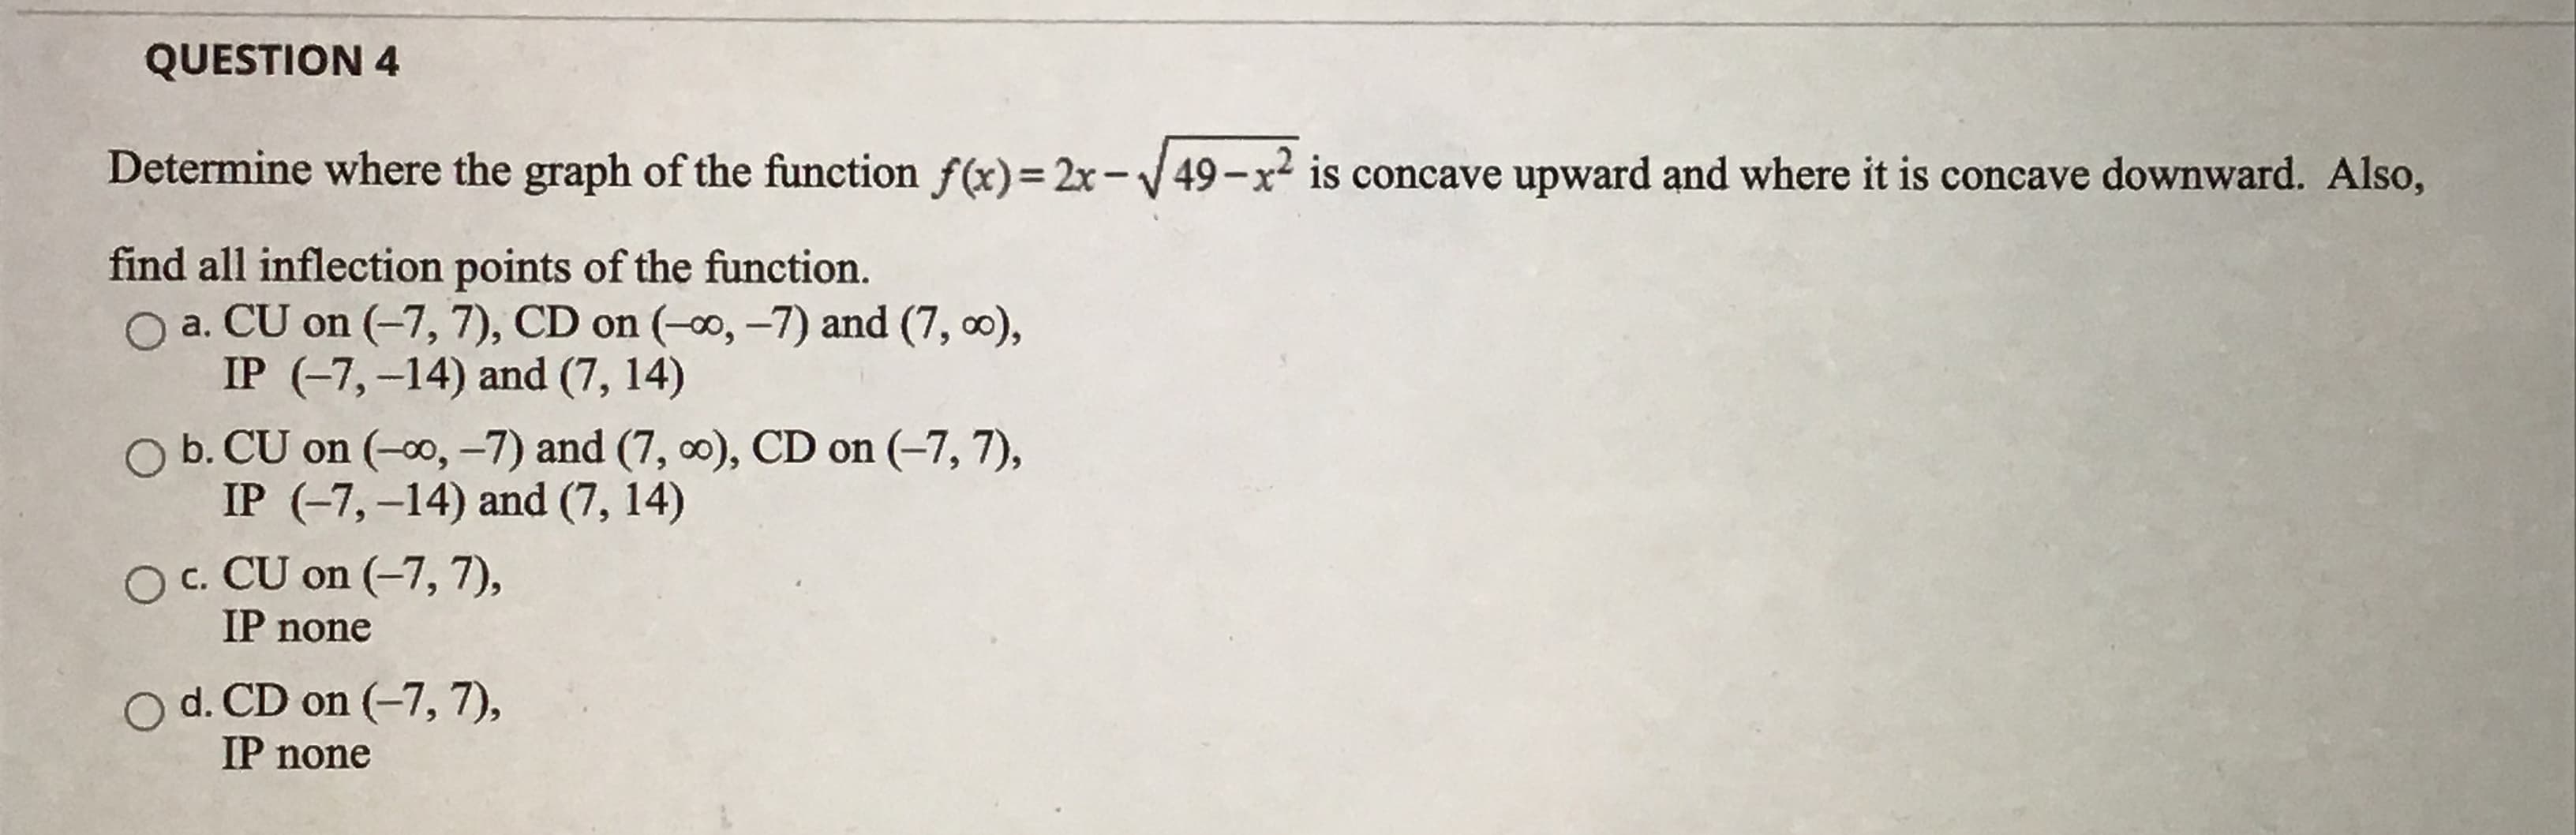 Determine where the graph of the function f(x)= 2x-V49-x is concave upward and where it is concave downward. Also,
find all inflection points of the function.
O a. CU on (-7, 7), CD on (-o, -7) and (7, 0),
IP (-7,-14) and (7, 14)
O b. CU on (-0, -7) and (7, 0), CD on (-7, 7),
IP (-7,-14) and (7, 14)
O c. CU on (-7, 7),
IP none
O d. CD on (-7, 7),
IP none
